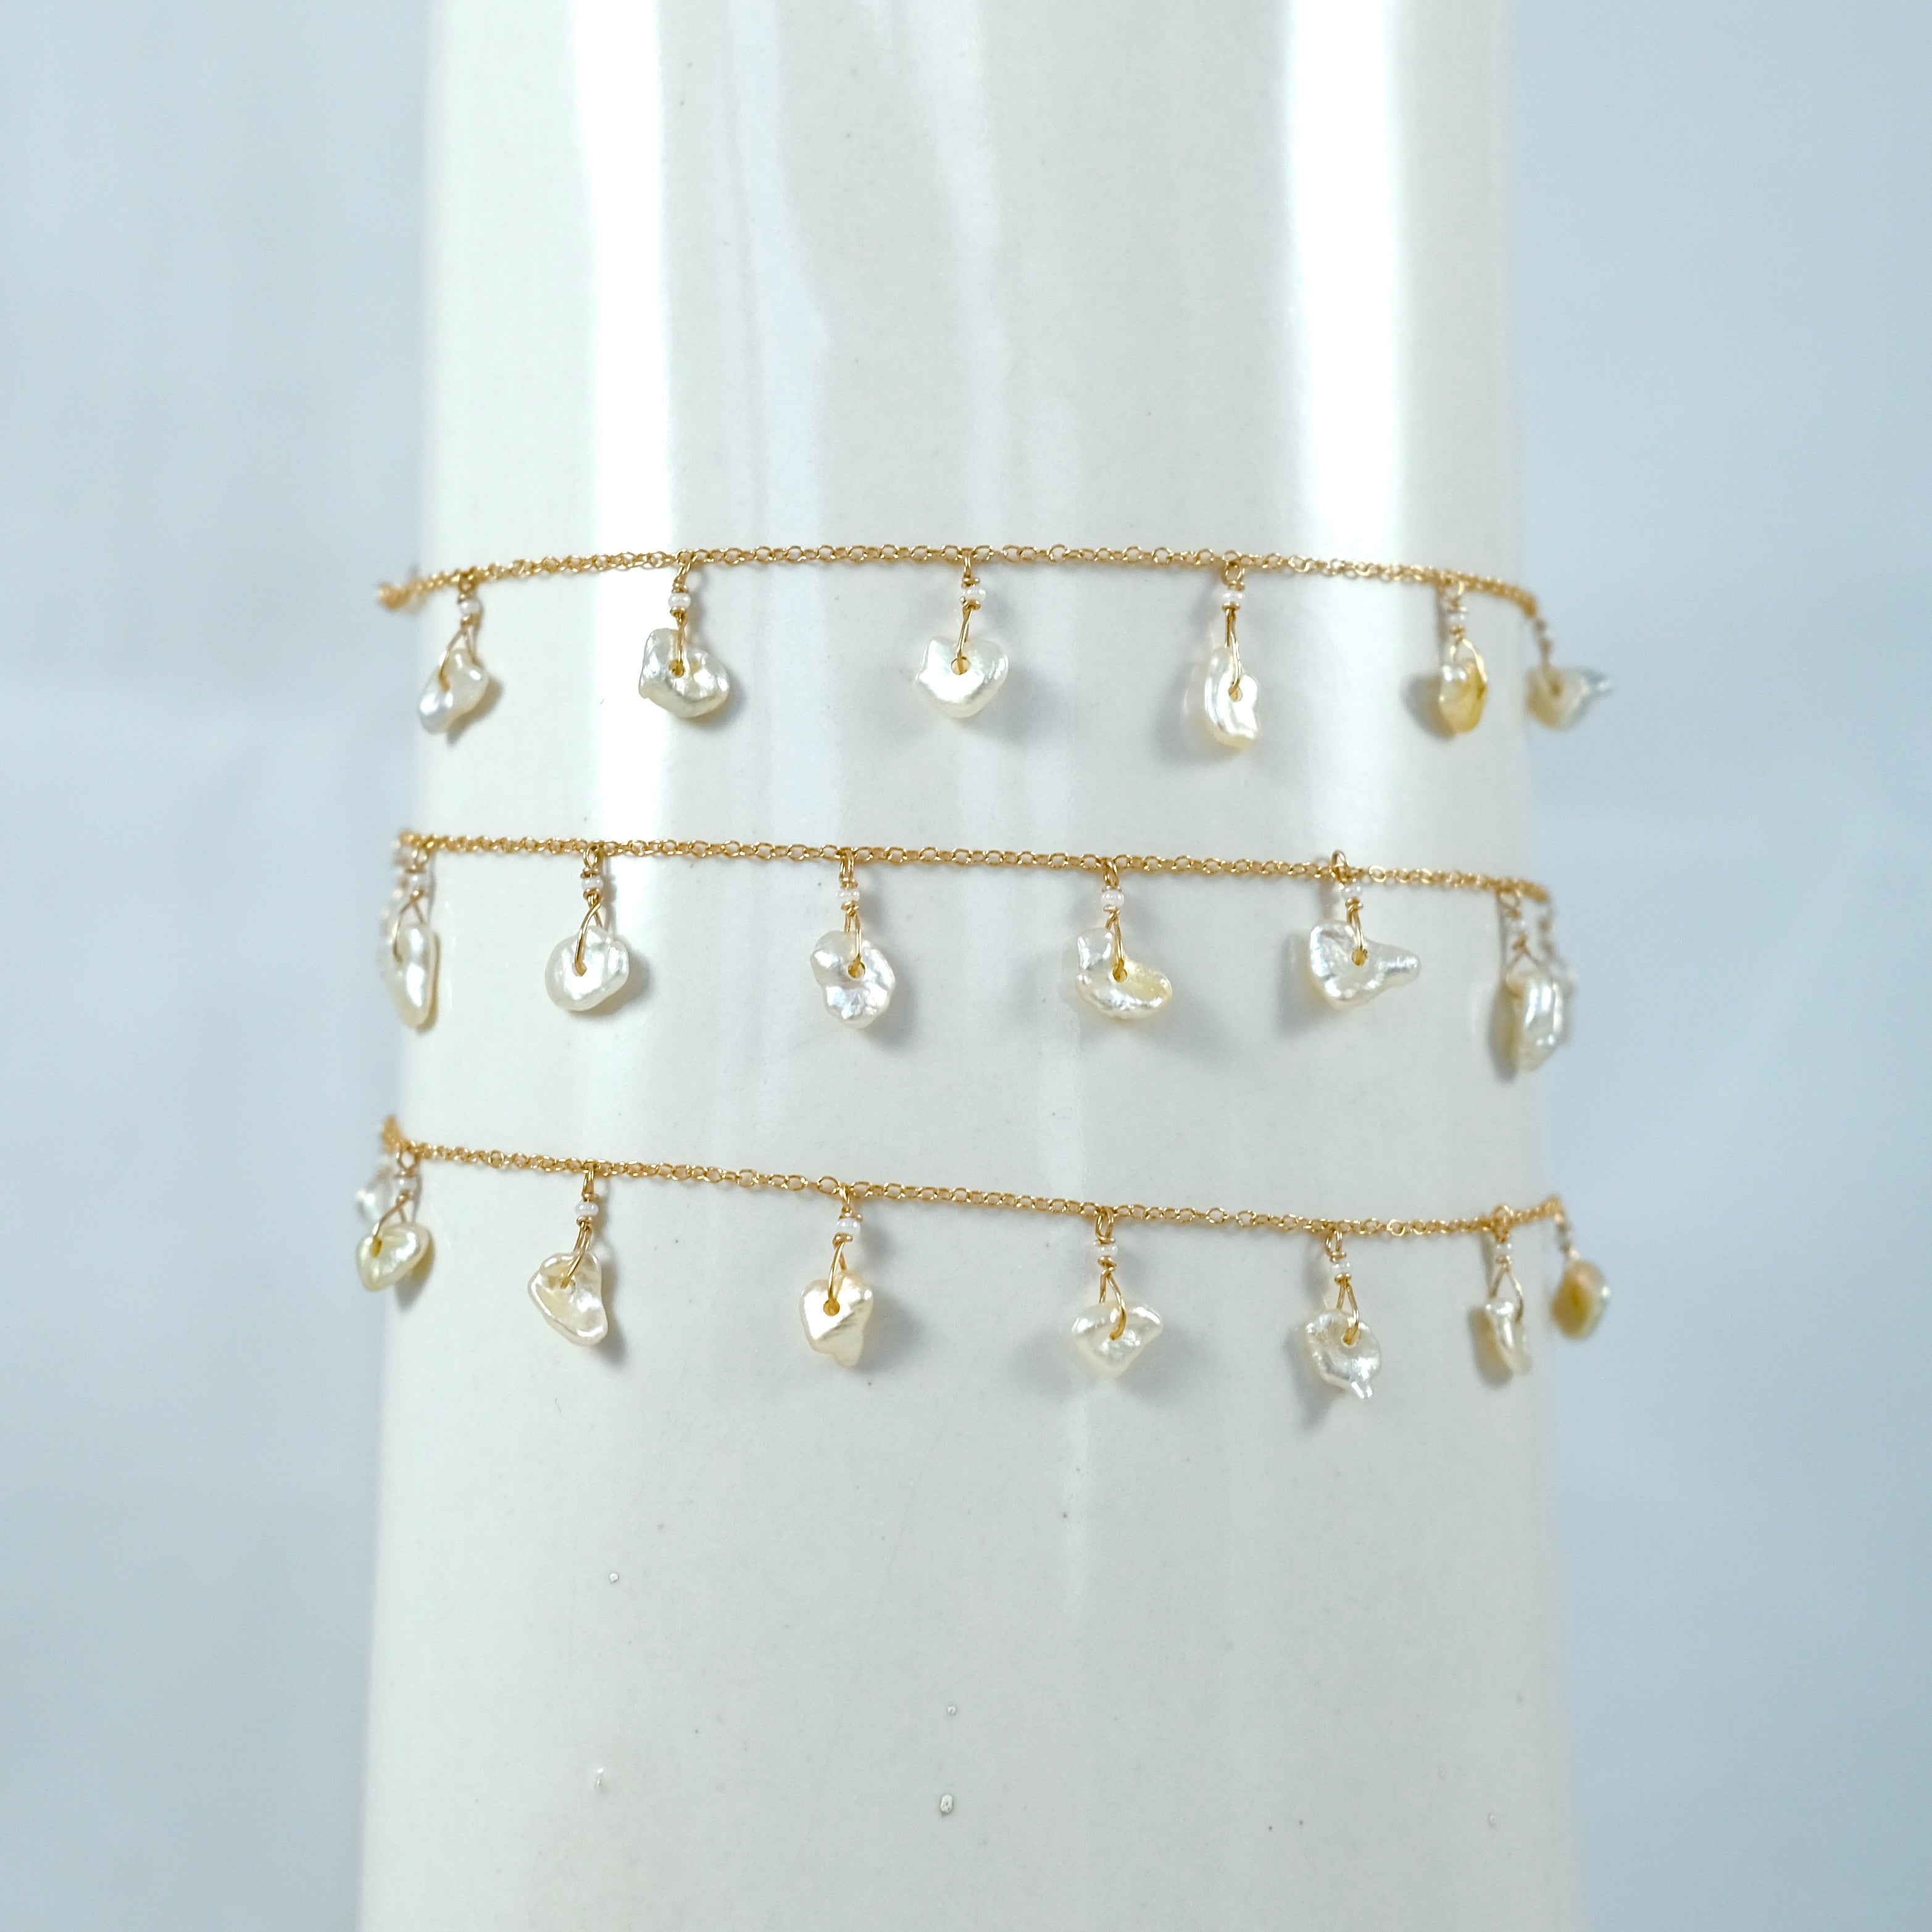 14k Gold Chain Necklace w/ Japanese Akoya Pearls / Saltwater Keshi Pearls & Antique Italian Beads